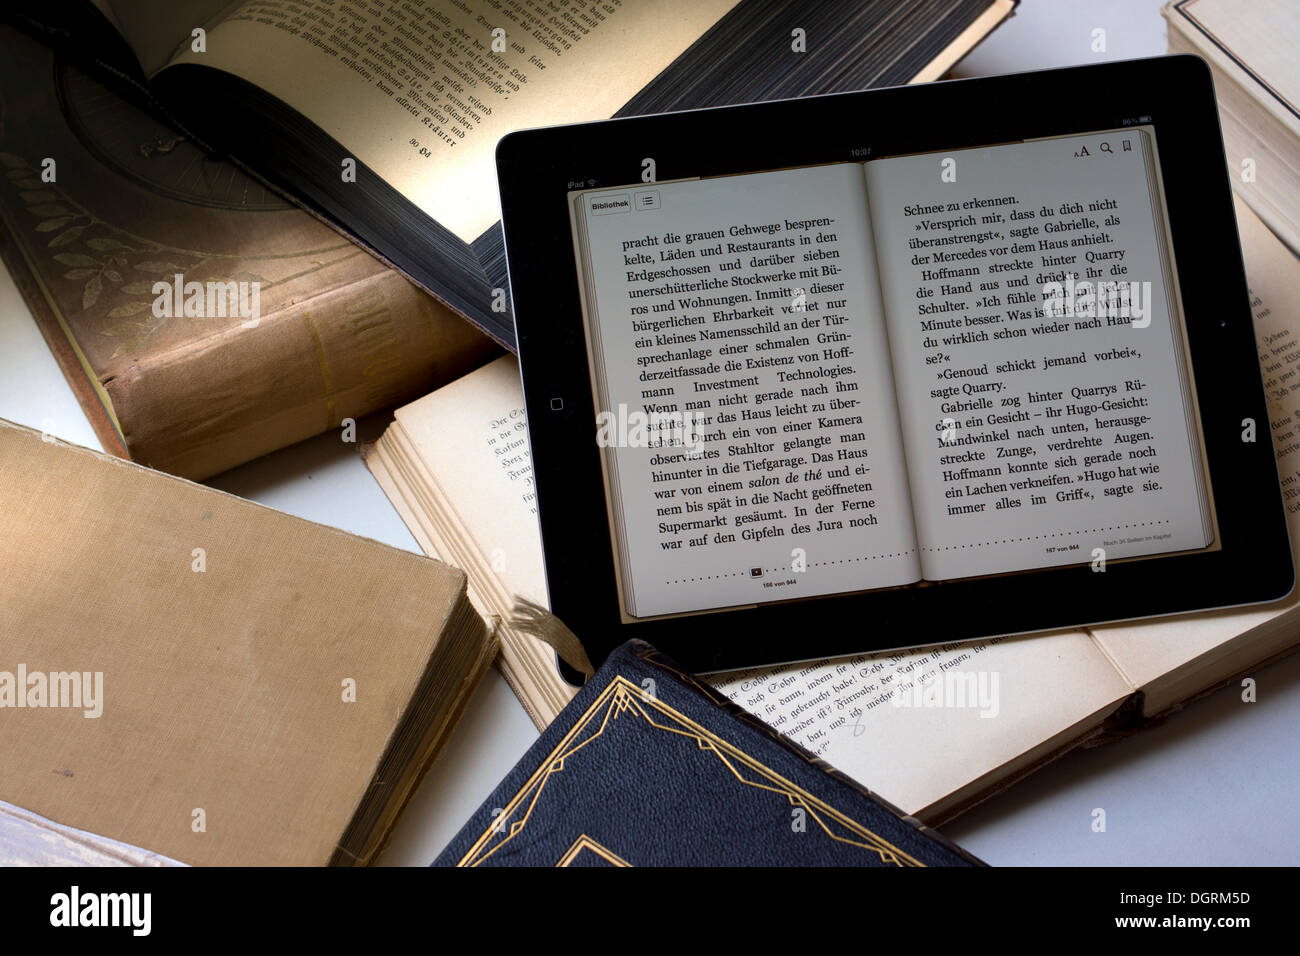 E-book reader beside old books, Germany Stock Photo